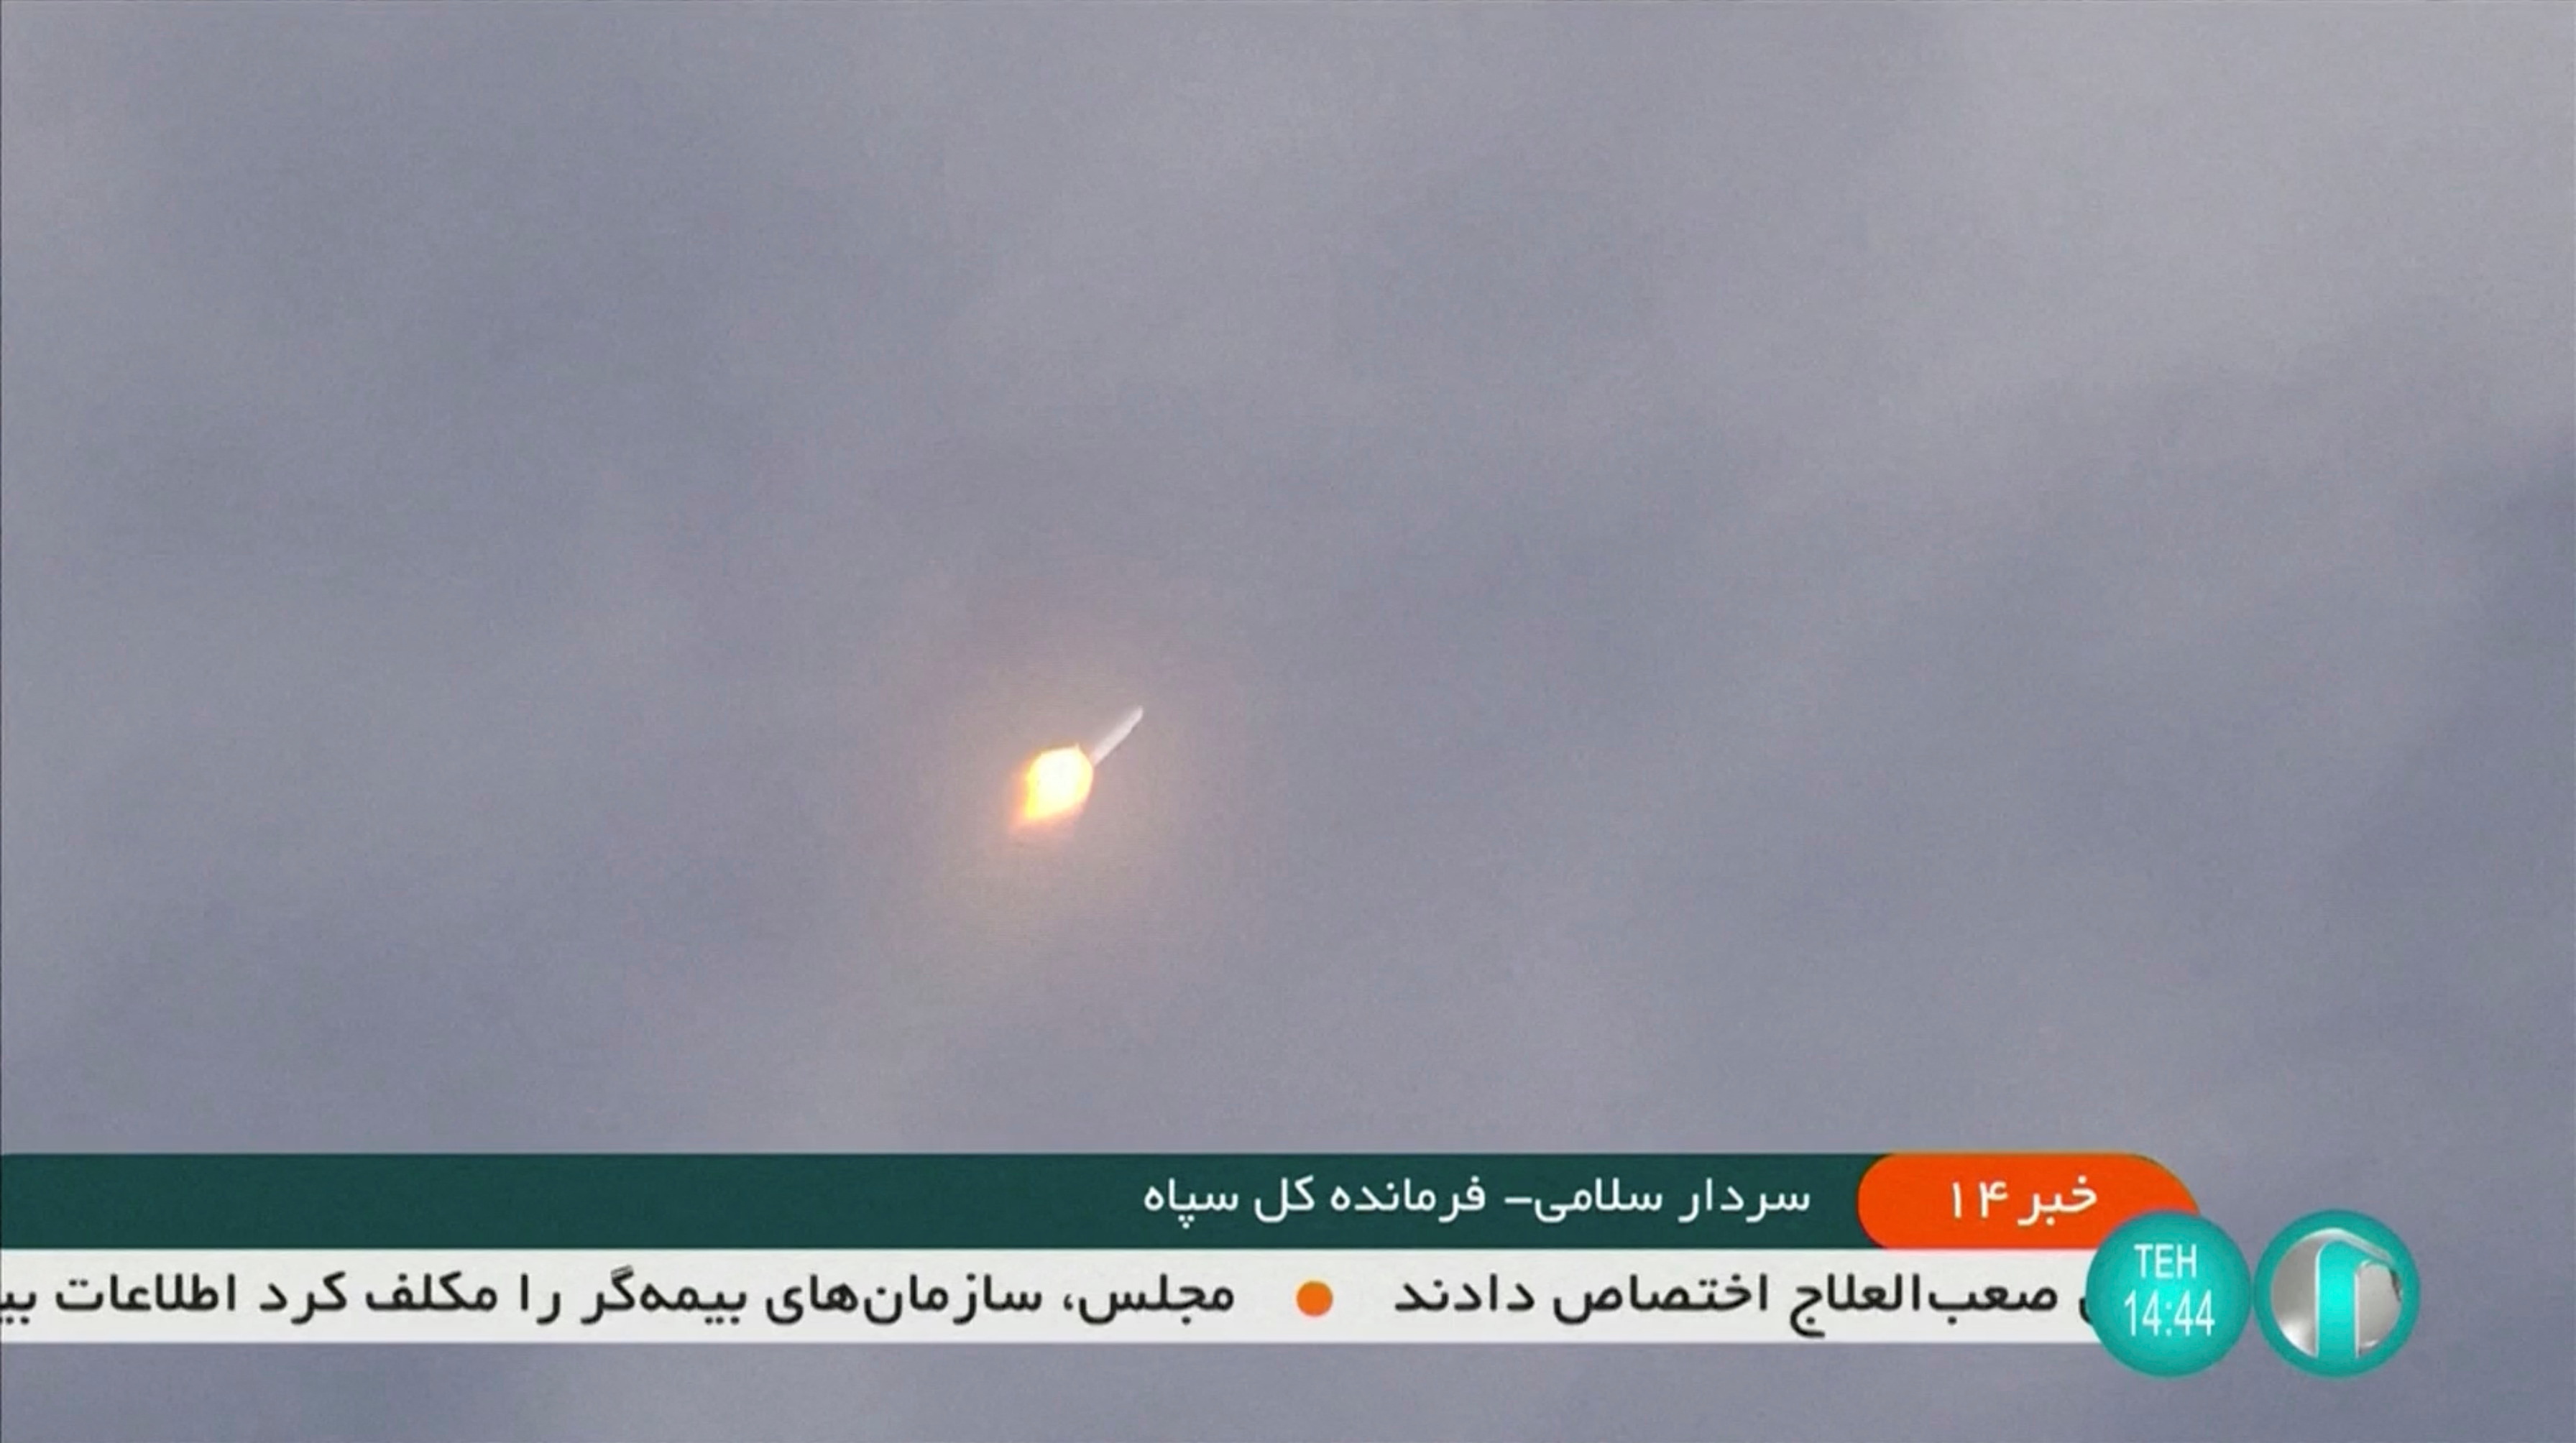 Iran's Noor 2 satellite launches into space